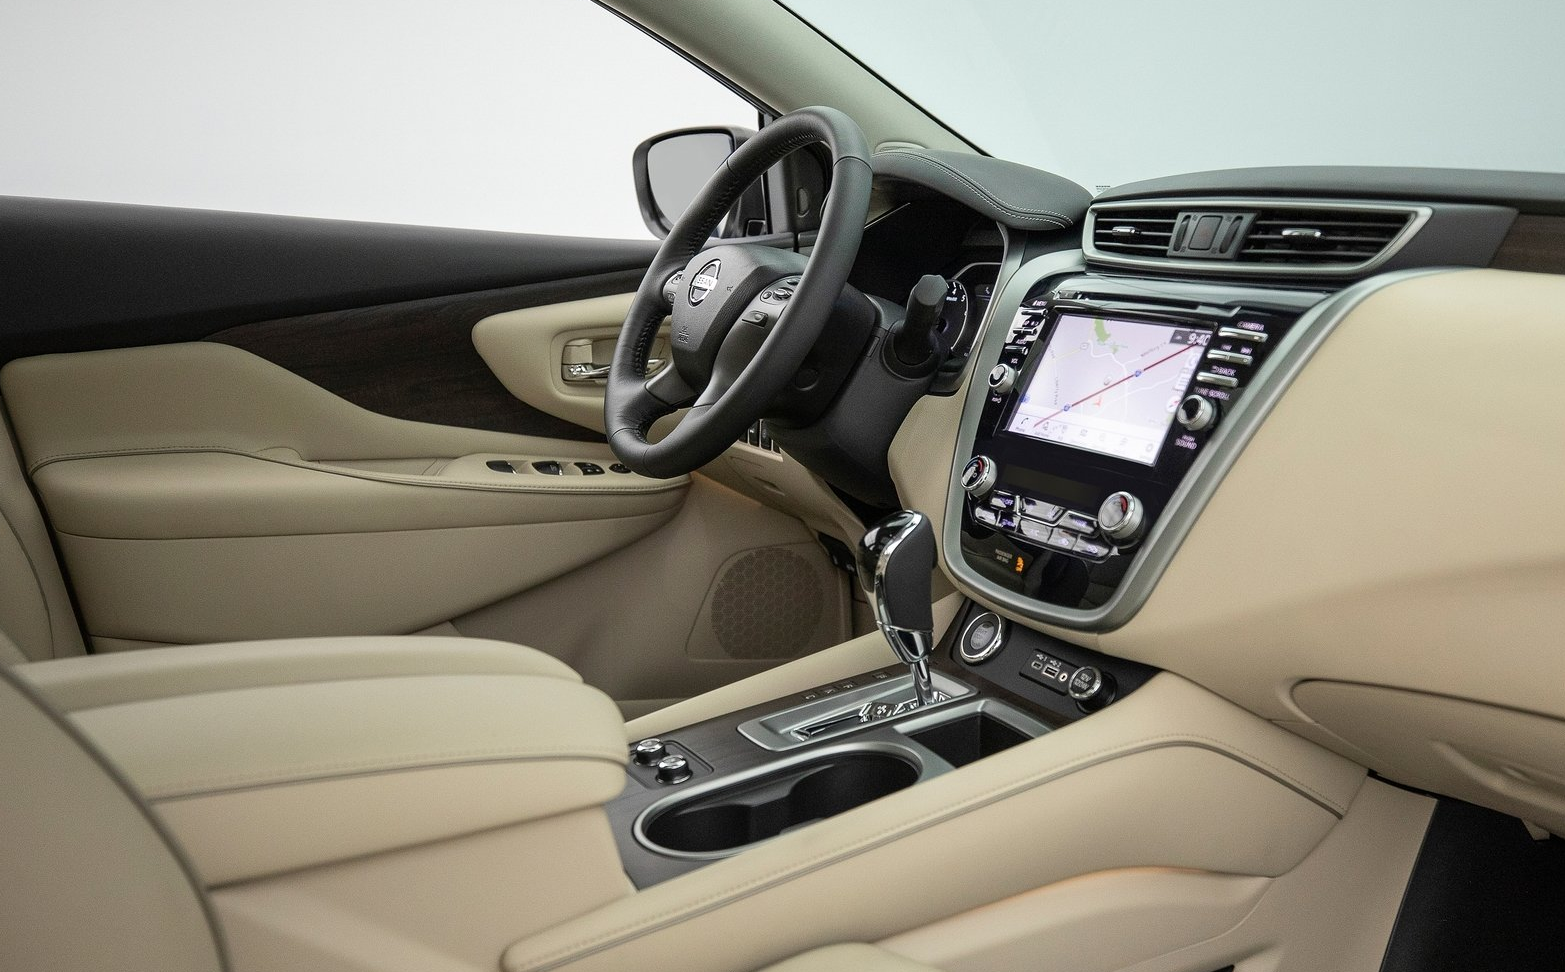 2019 Nissan Murano - inside features